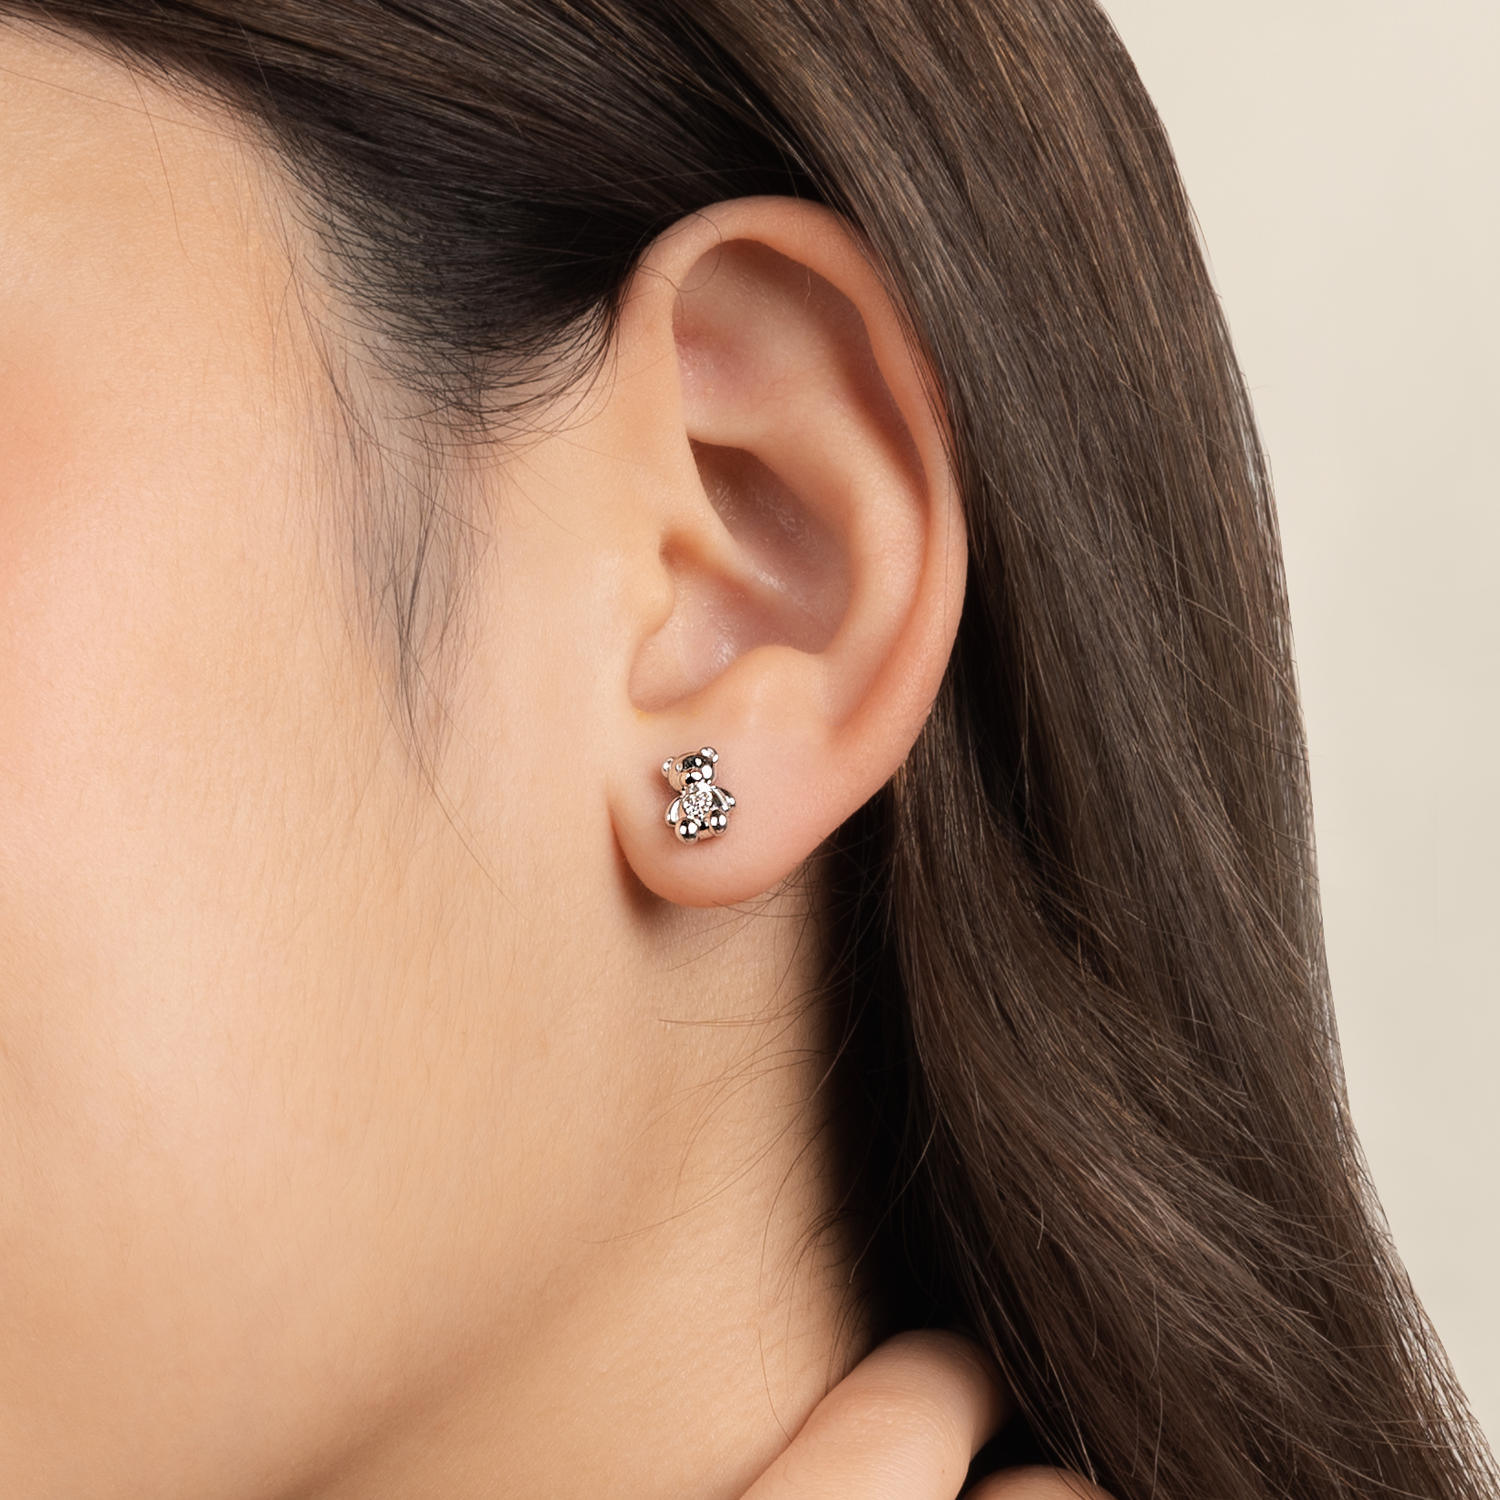 Model is wearing adorable and dainty earrings in 925 silver with cubic zirconia